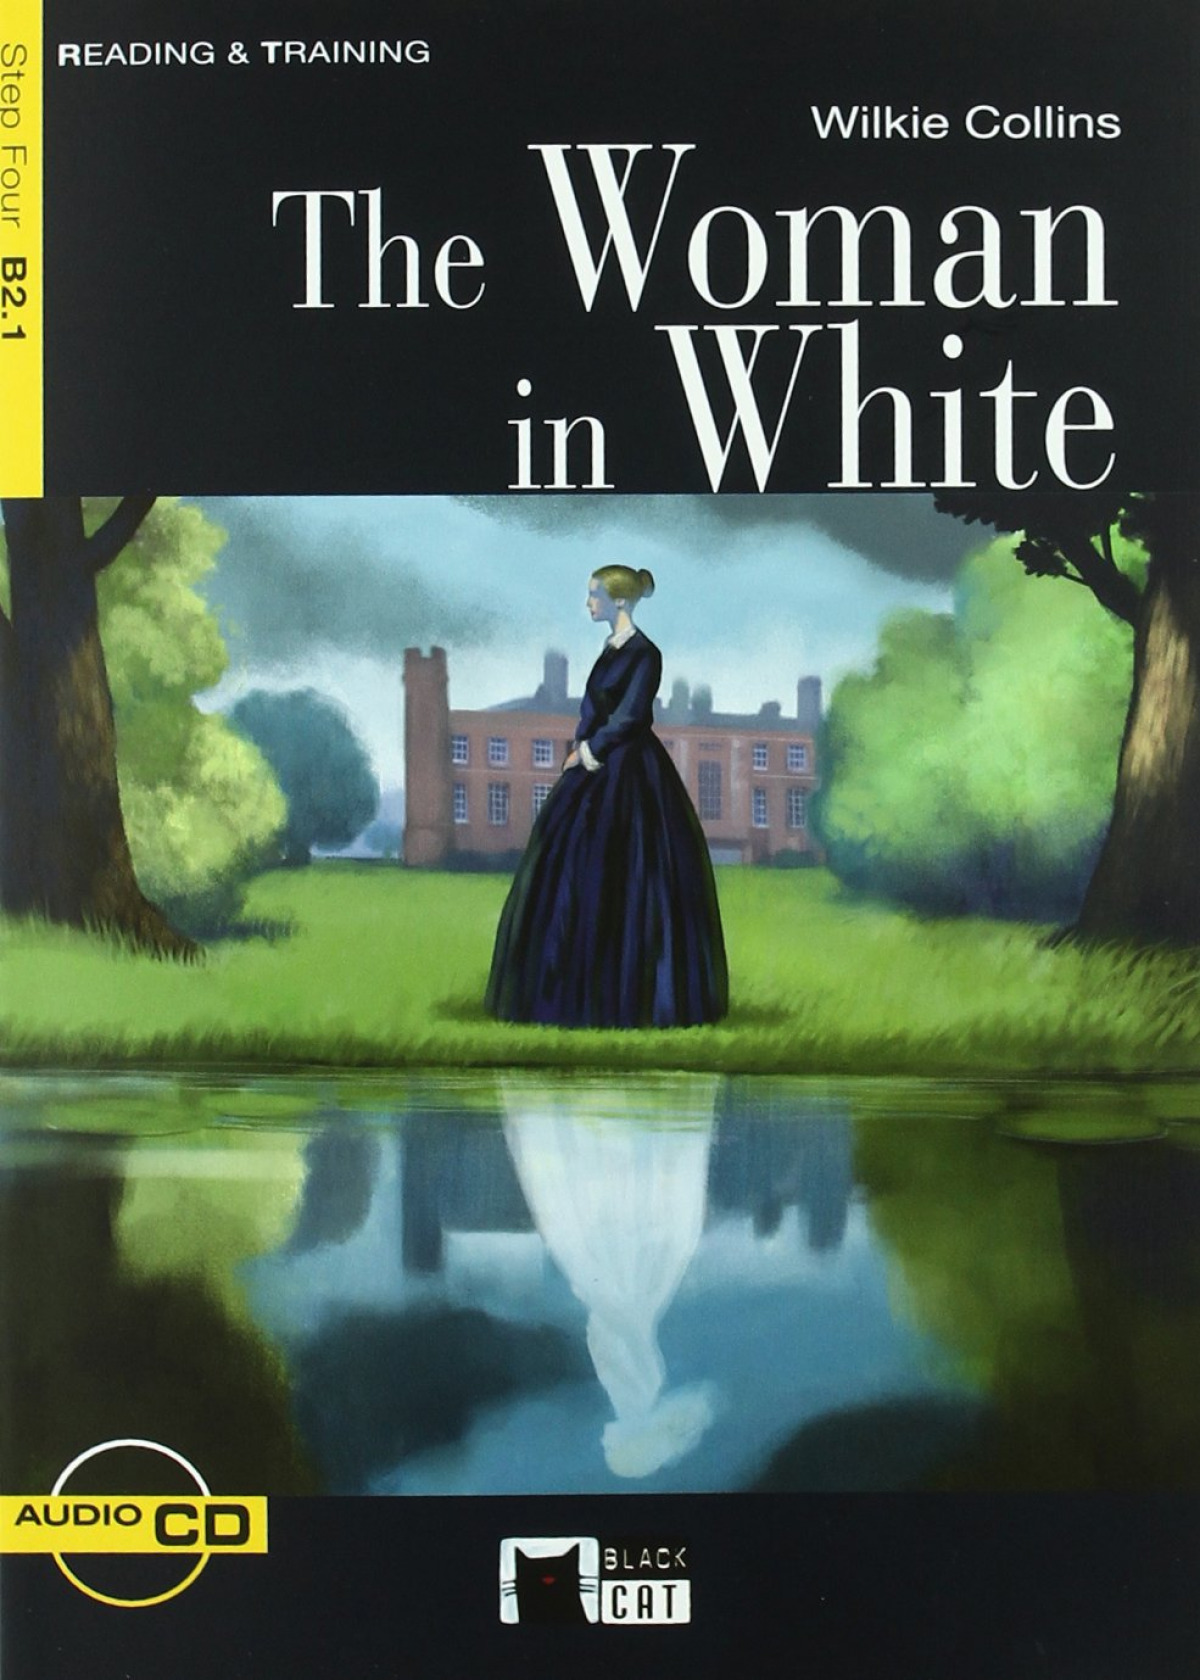 The Woman in White. Book + CD - Cideb Editrice S.R.L.